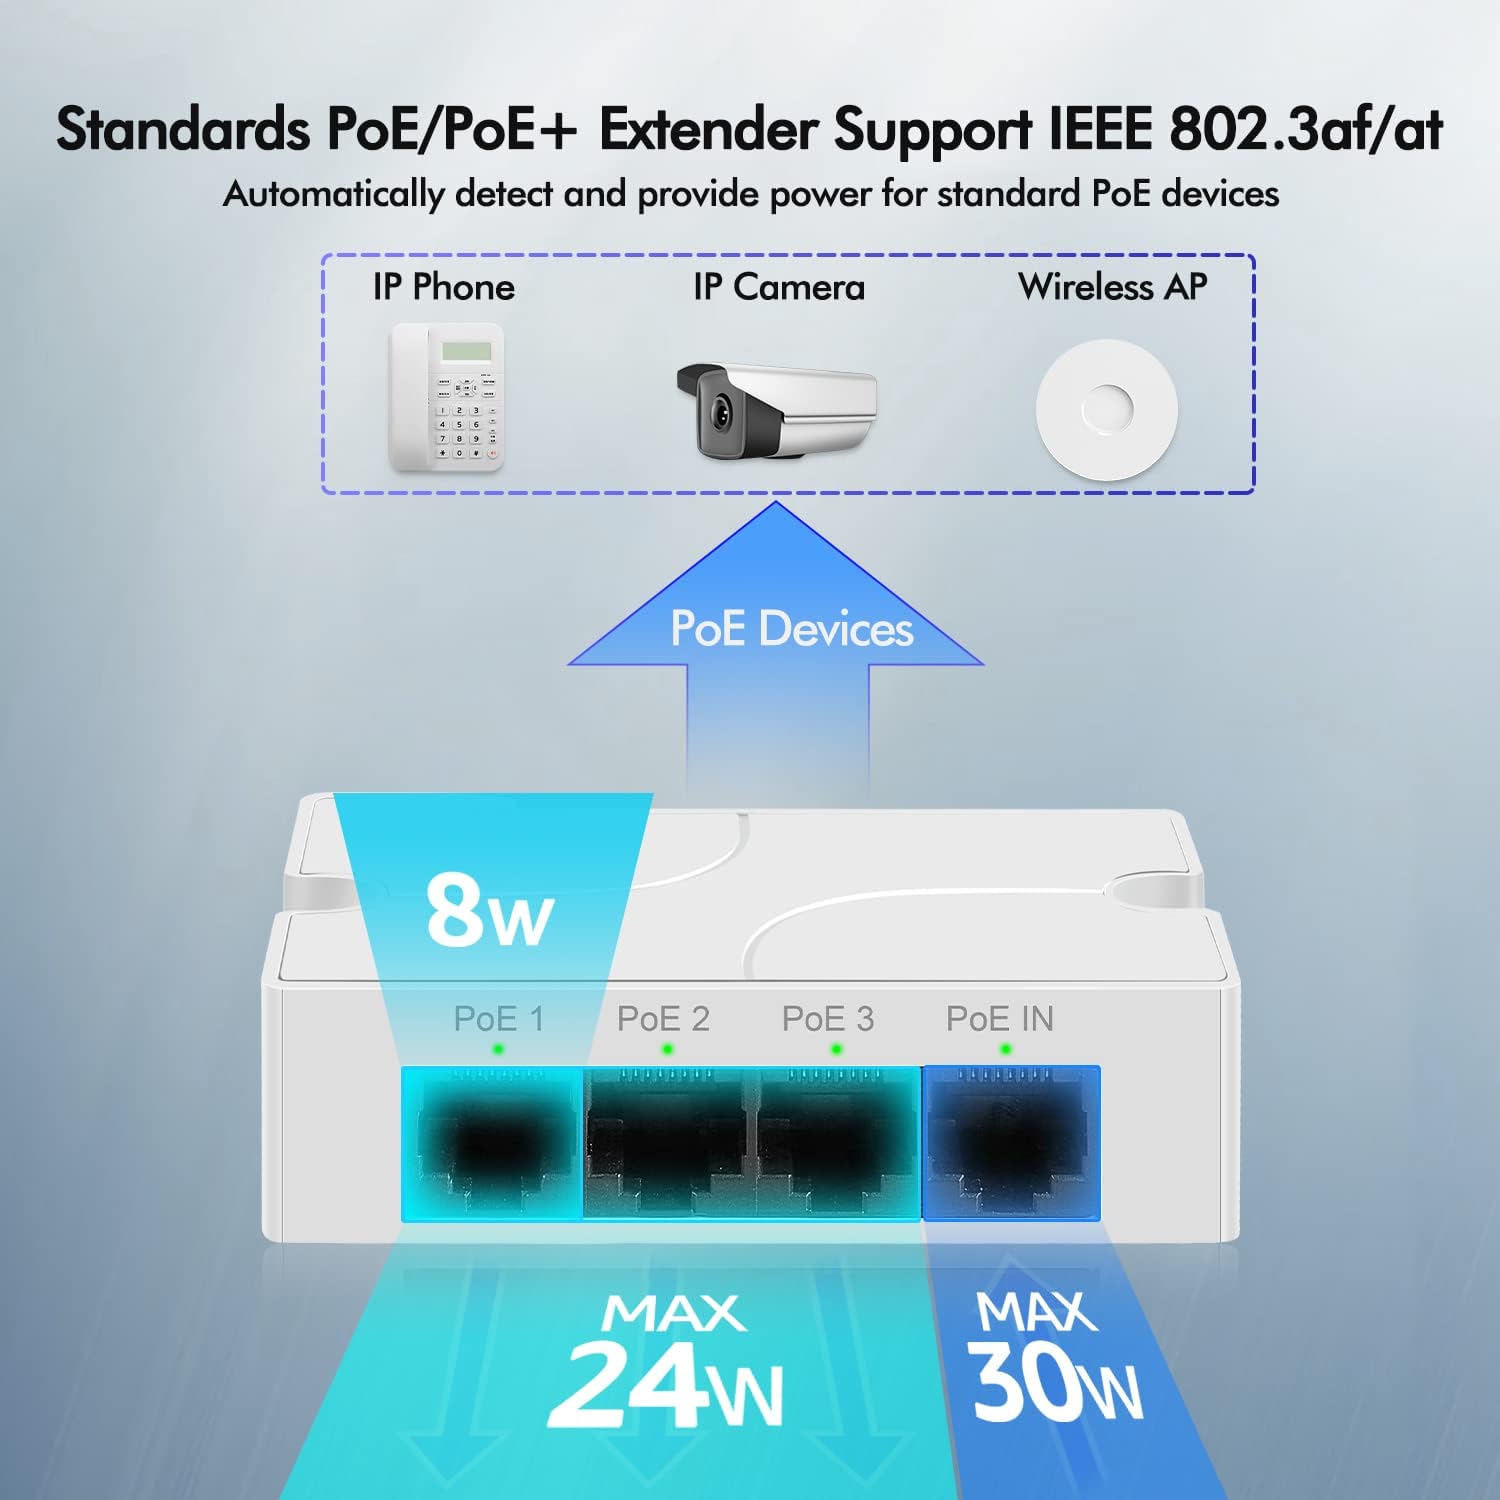 YuanLey 4 Port PoE Extender with 3 PoE Out, IEEE 802.3af/at Mini 4 Channel  PoE Repeater 100Mbps, Wall and Din Rail Mount Passthrough POE